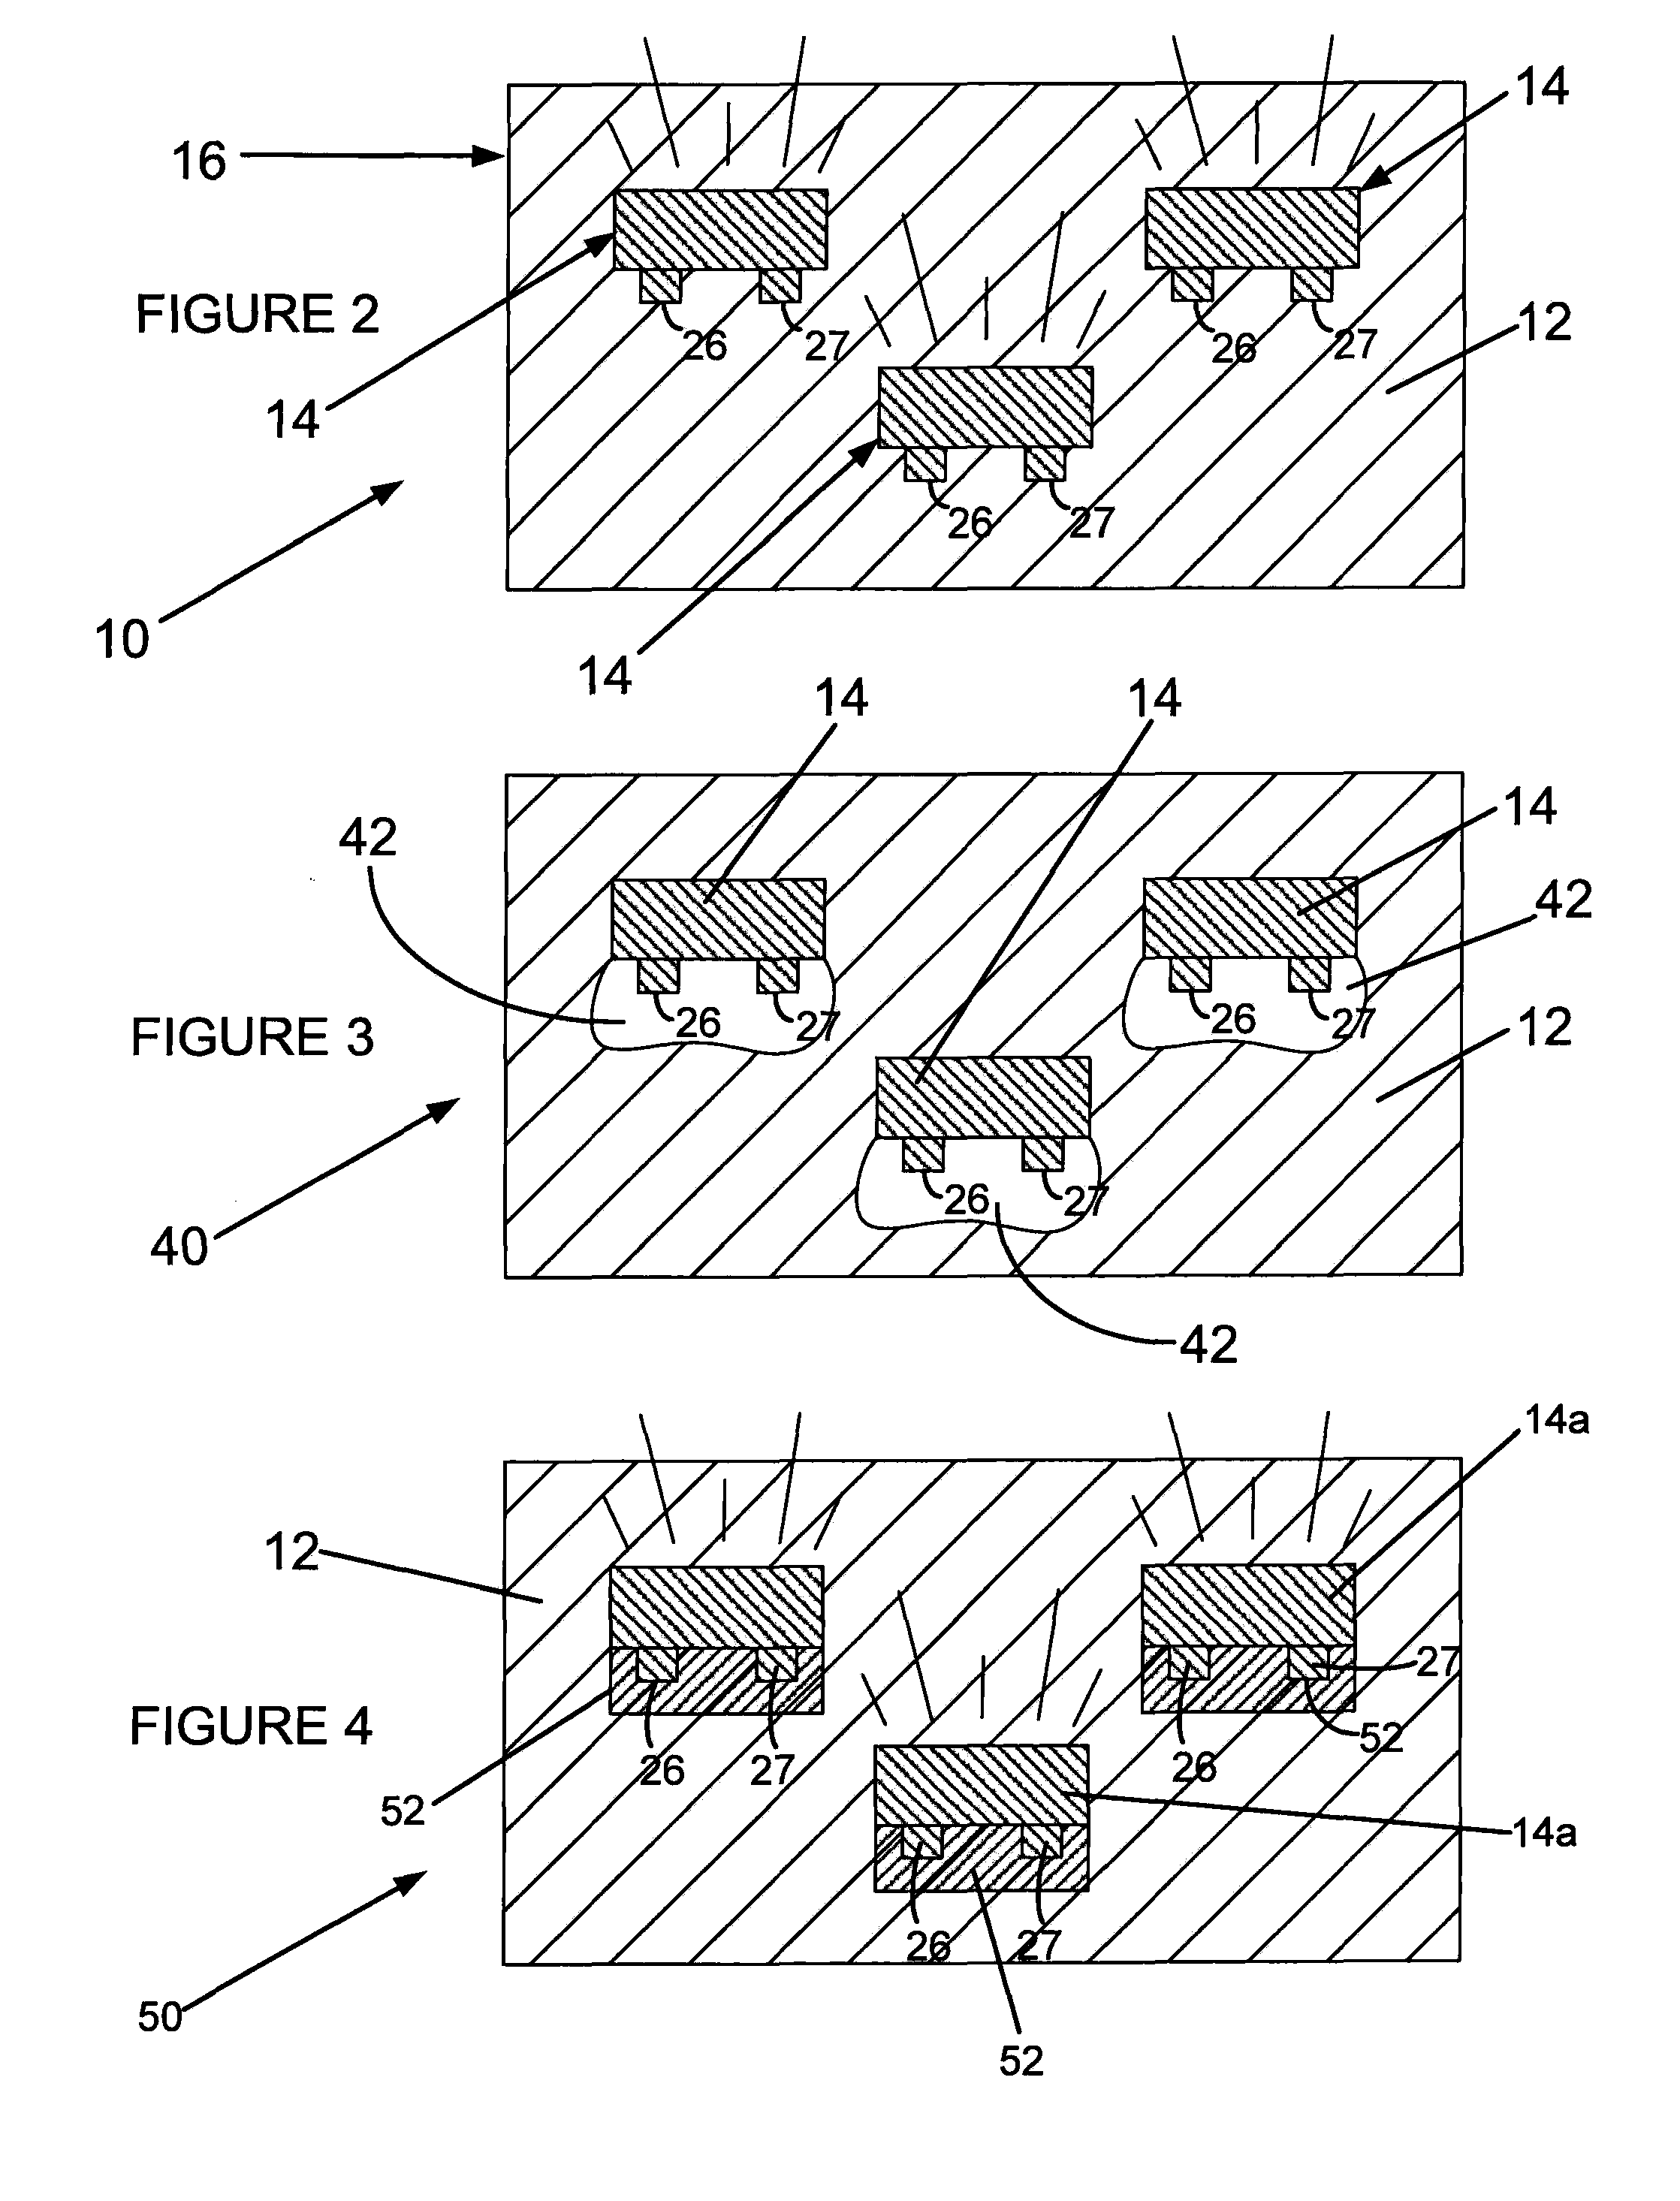 Soap with dispersed articles producing light and/or sound